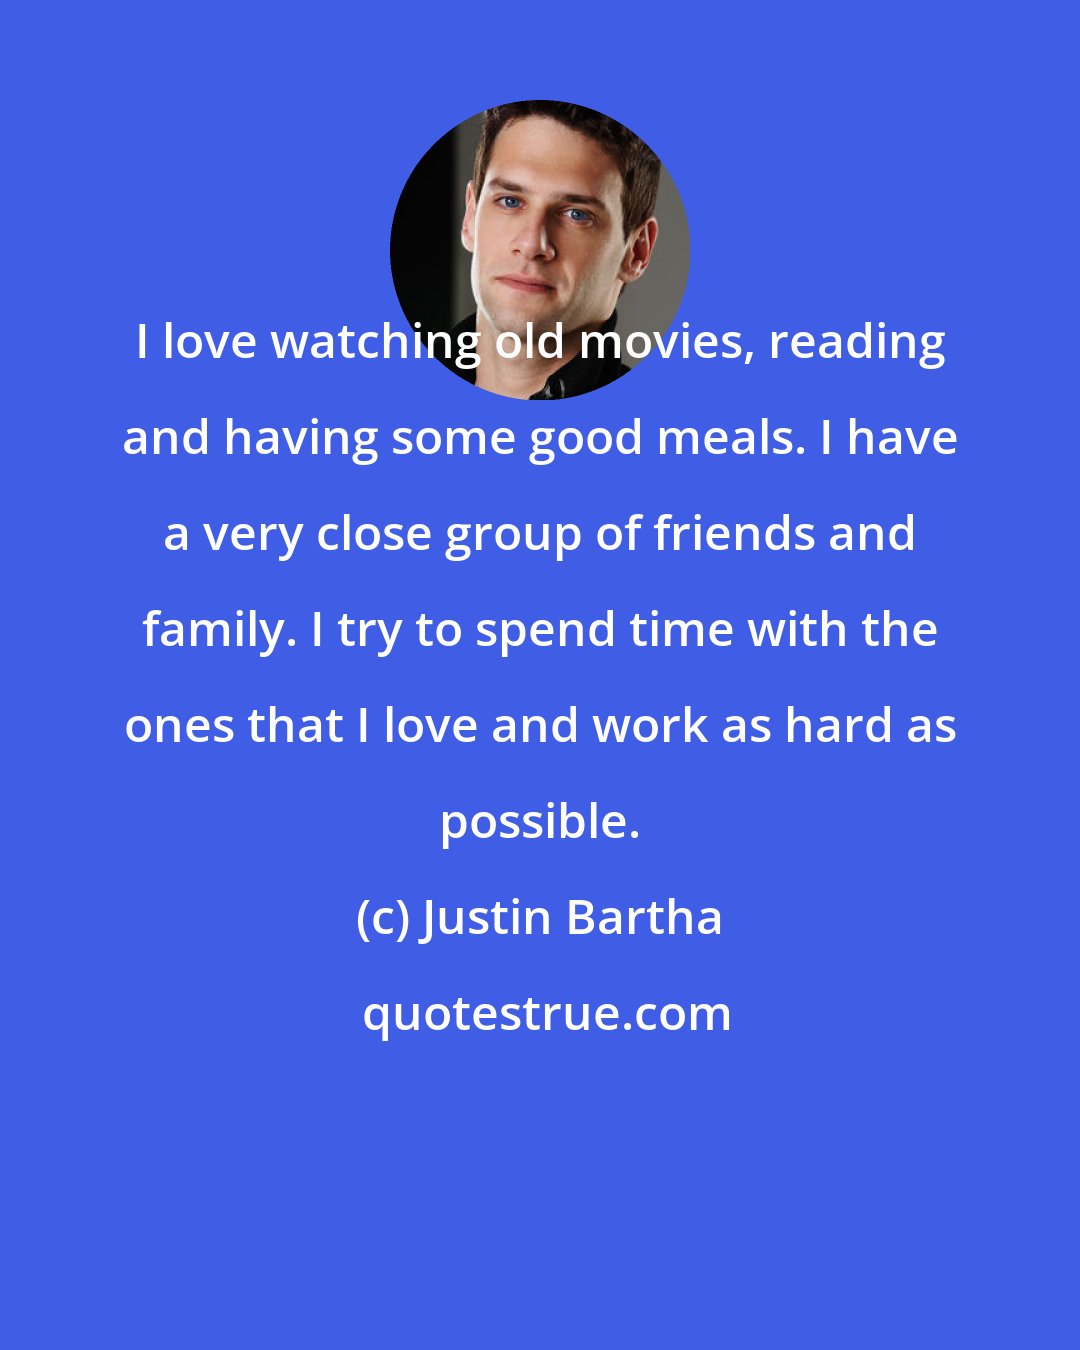 Justin Bartha: I love watching old movies, reading and having some good meals. I have a very close group of friends and family. I try to spend time with the ones that I love and work as hard as possible.